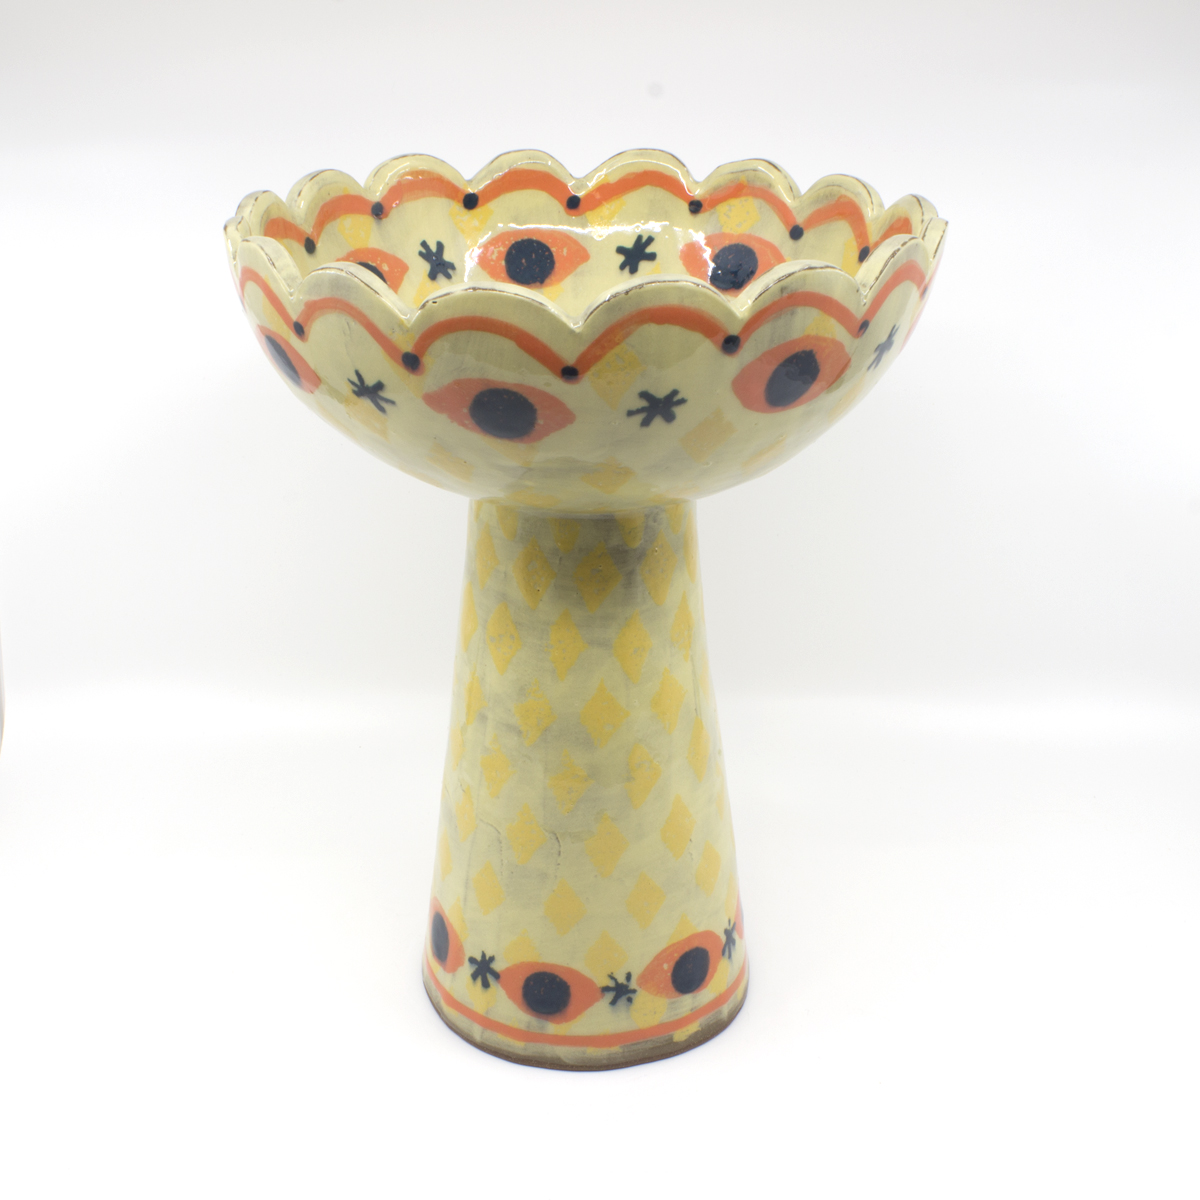 Ceramic bowl with a ceramic stand. Designed with lines, dots, stars, and eyes in yellow, navy, and orange. 